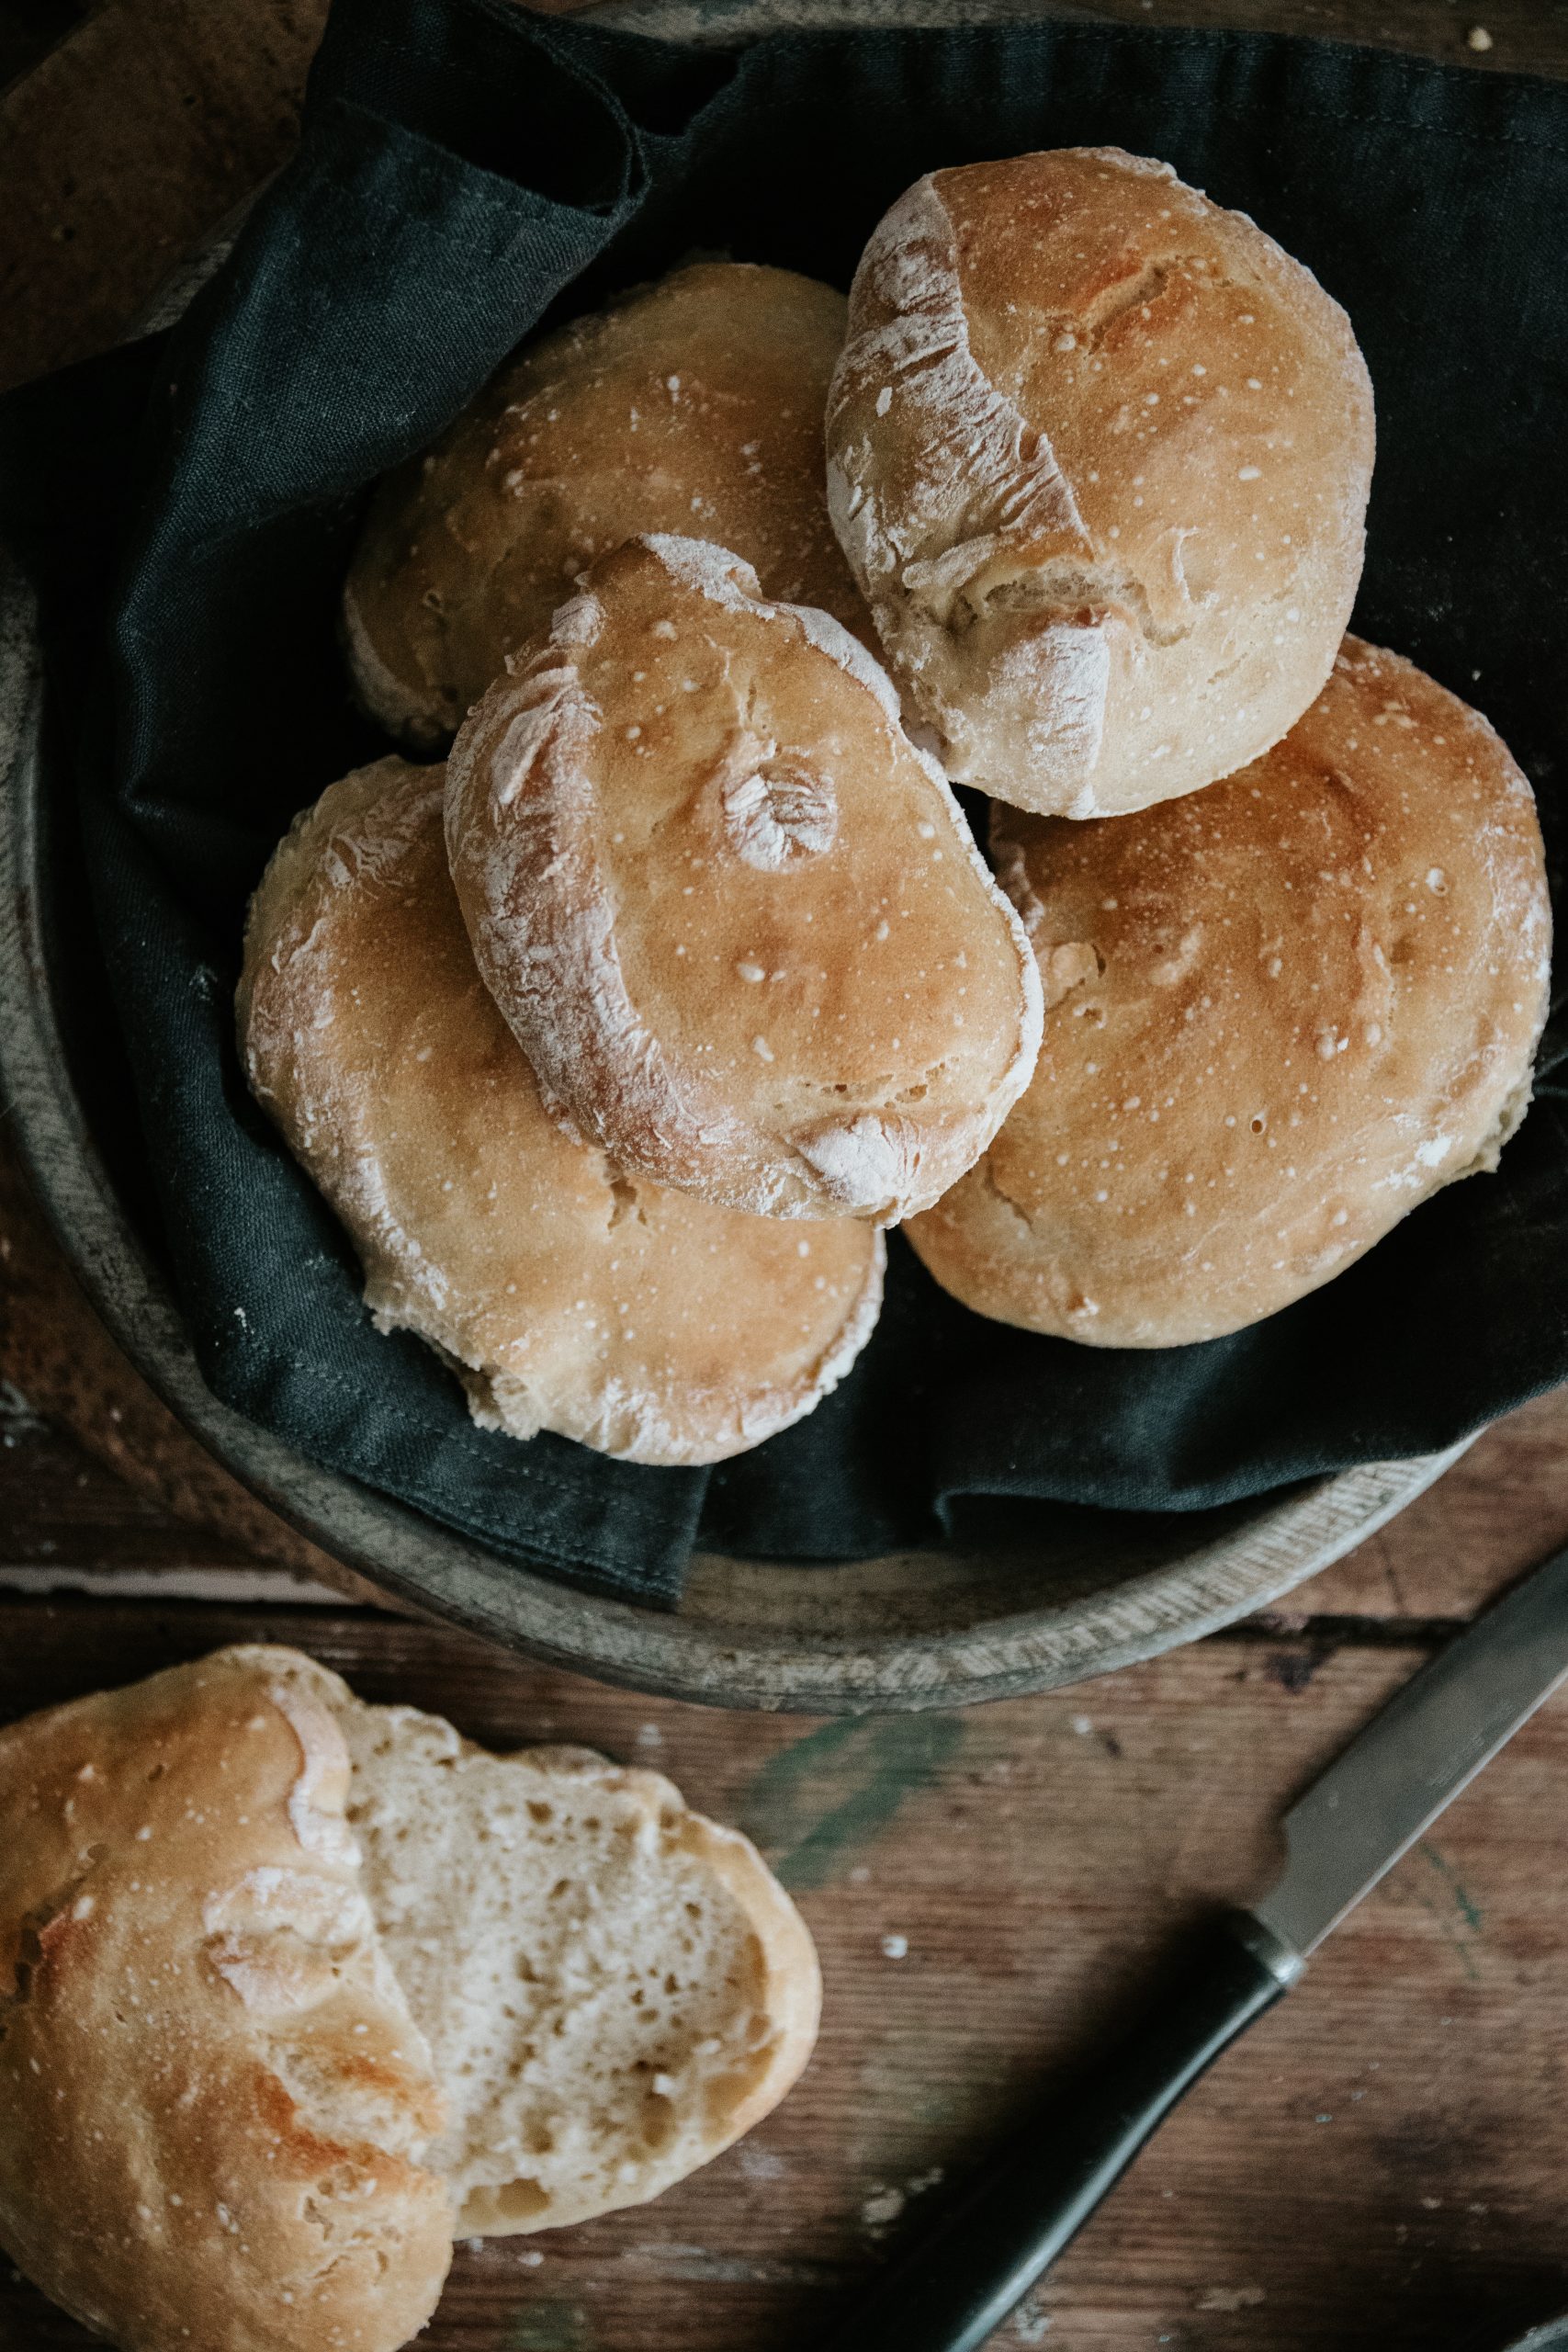 Over night bread rolls with walnuts